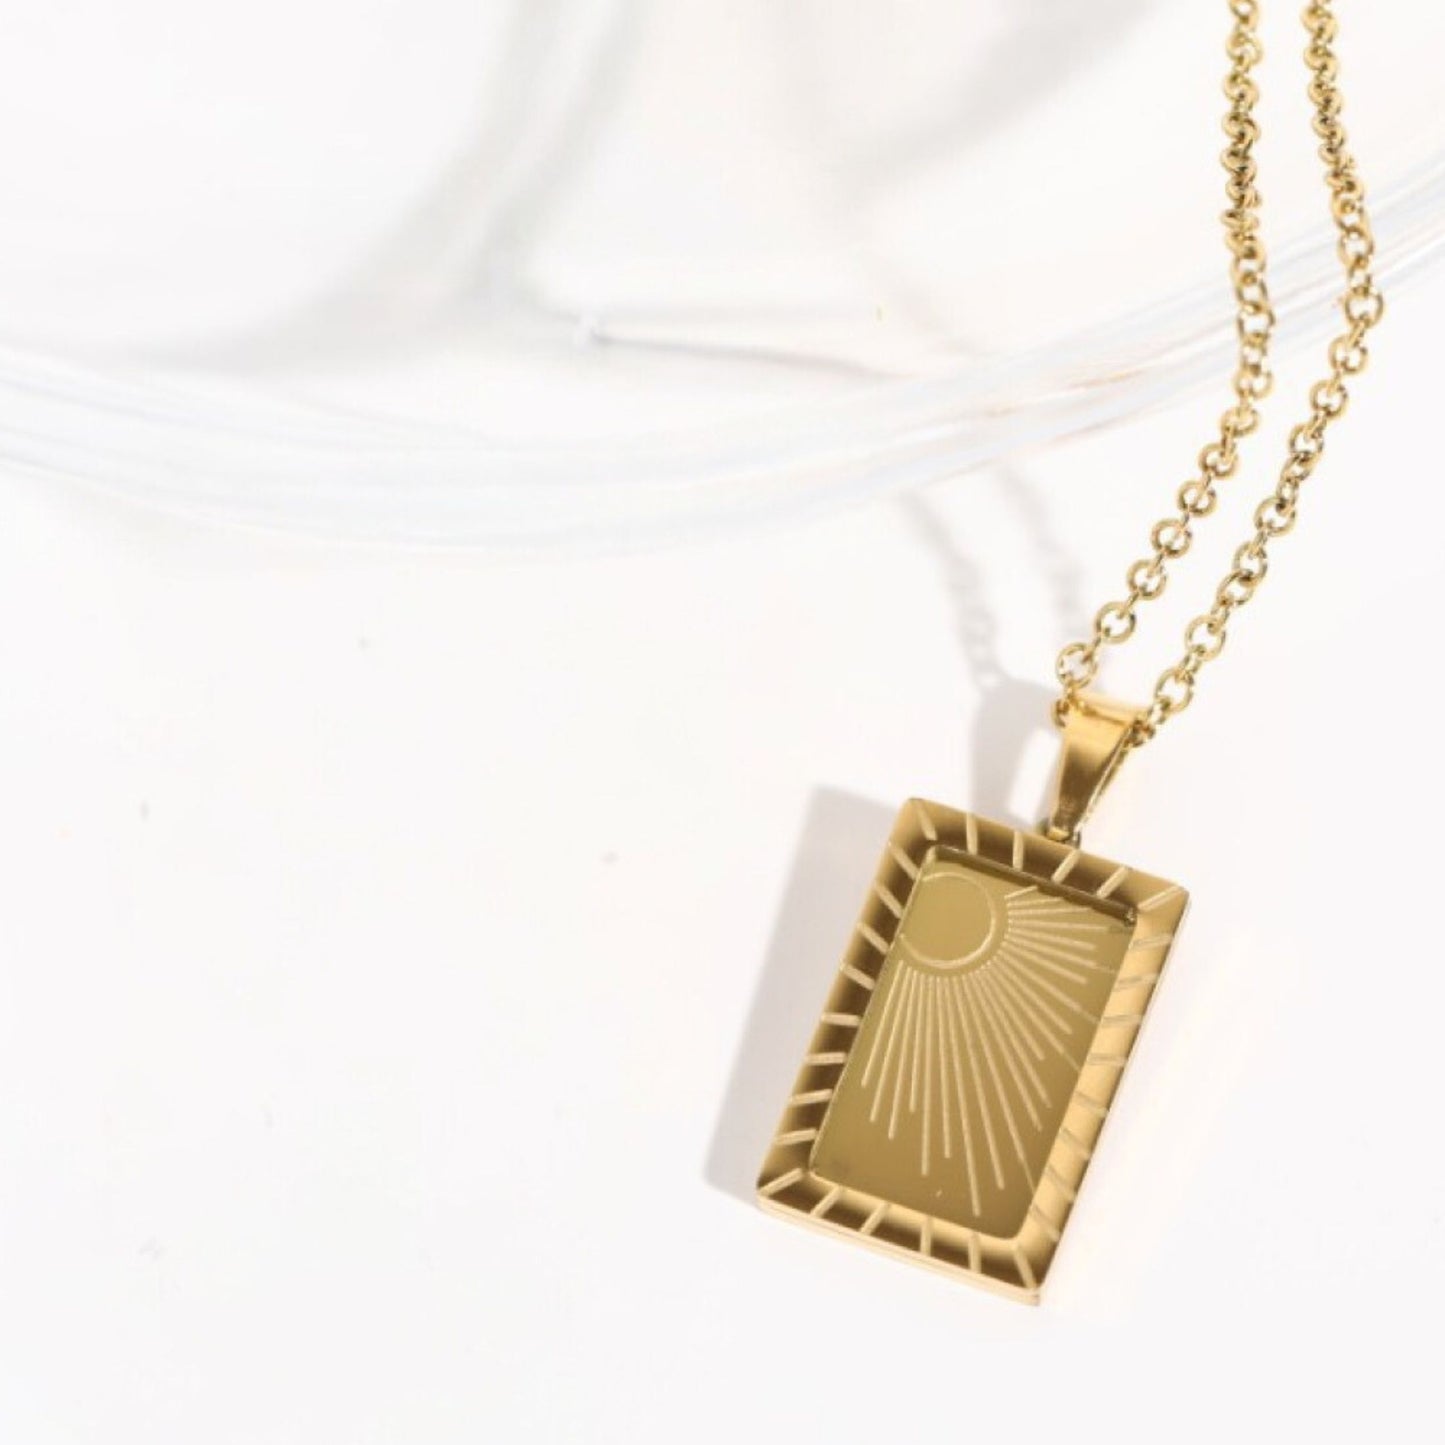 Think Celestial - 14K Gold Sun Pendant Necklace with Rays